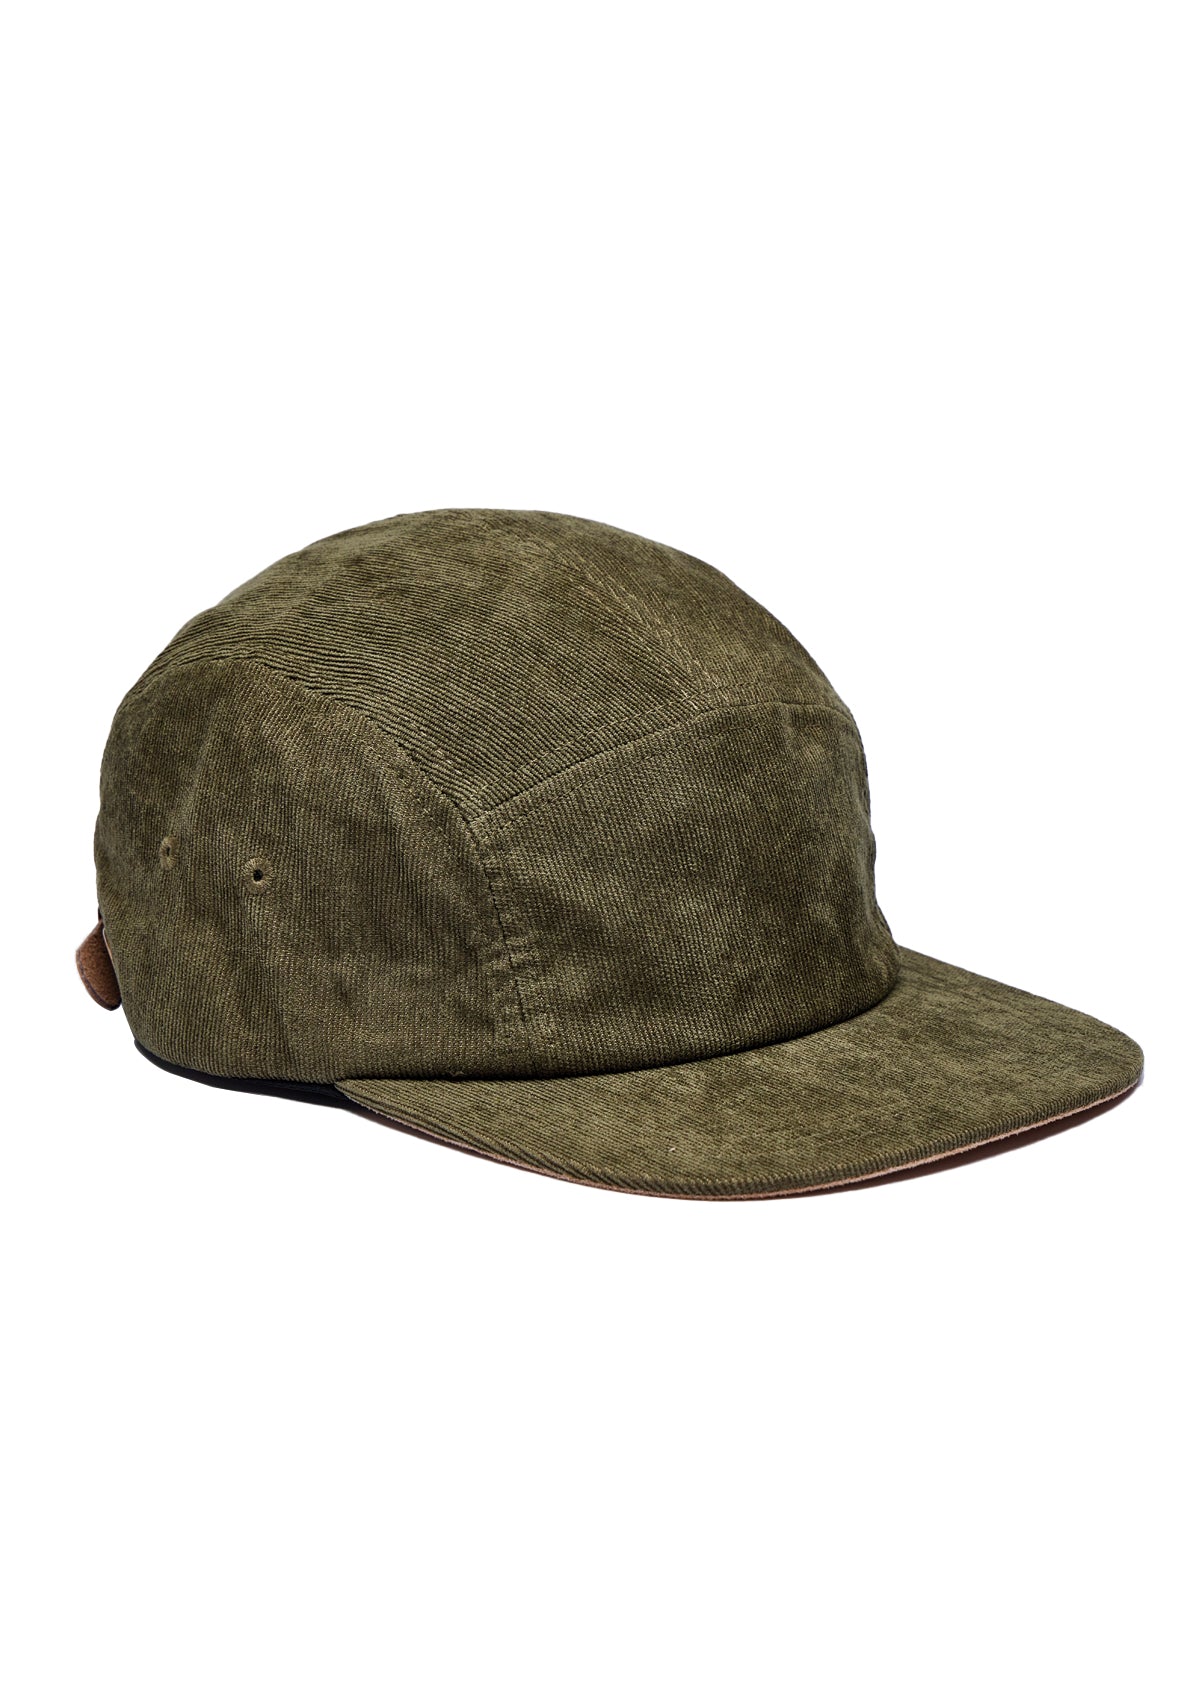 Washed Cord Cap - Dune Grass